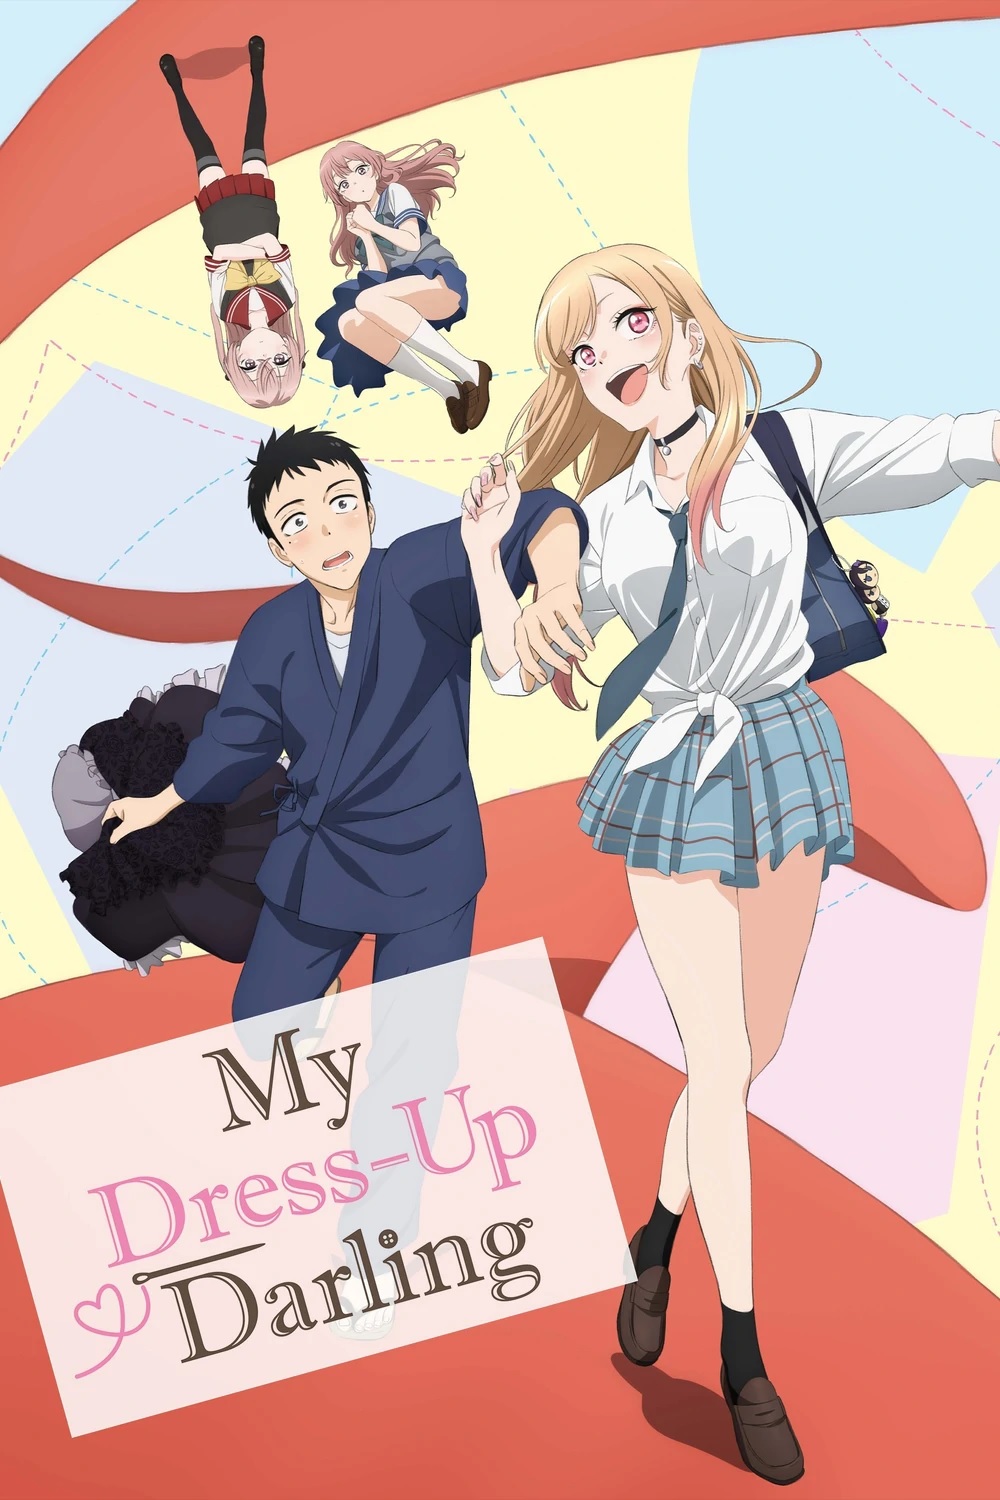 Mismatched Sisters Join the Cast of the My Dress-Up Darling TV Anime -  Crunchyroll News